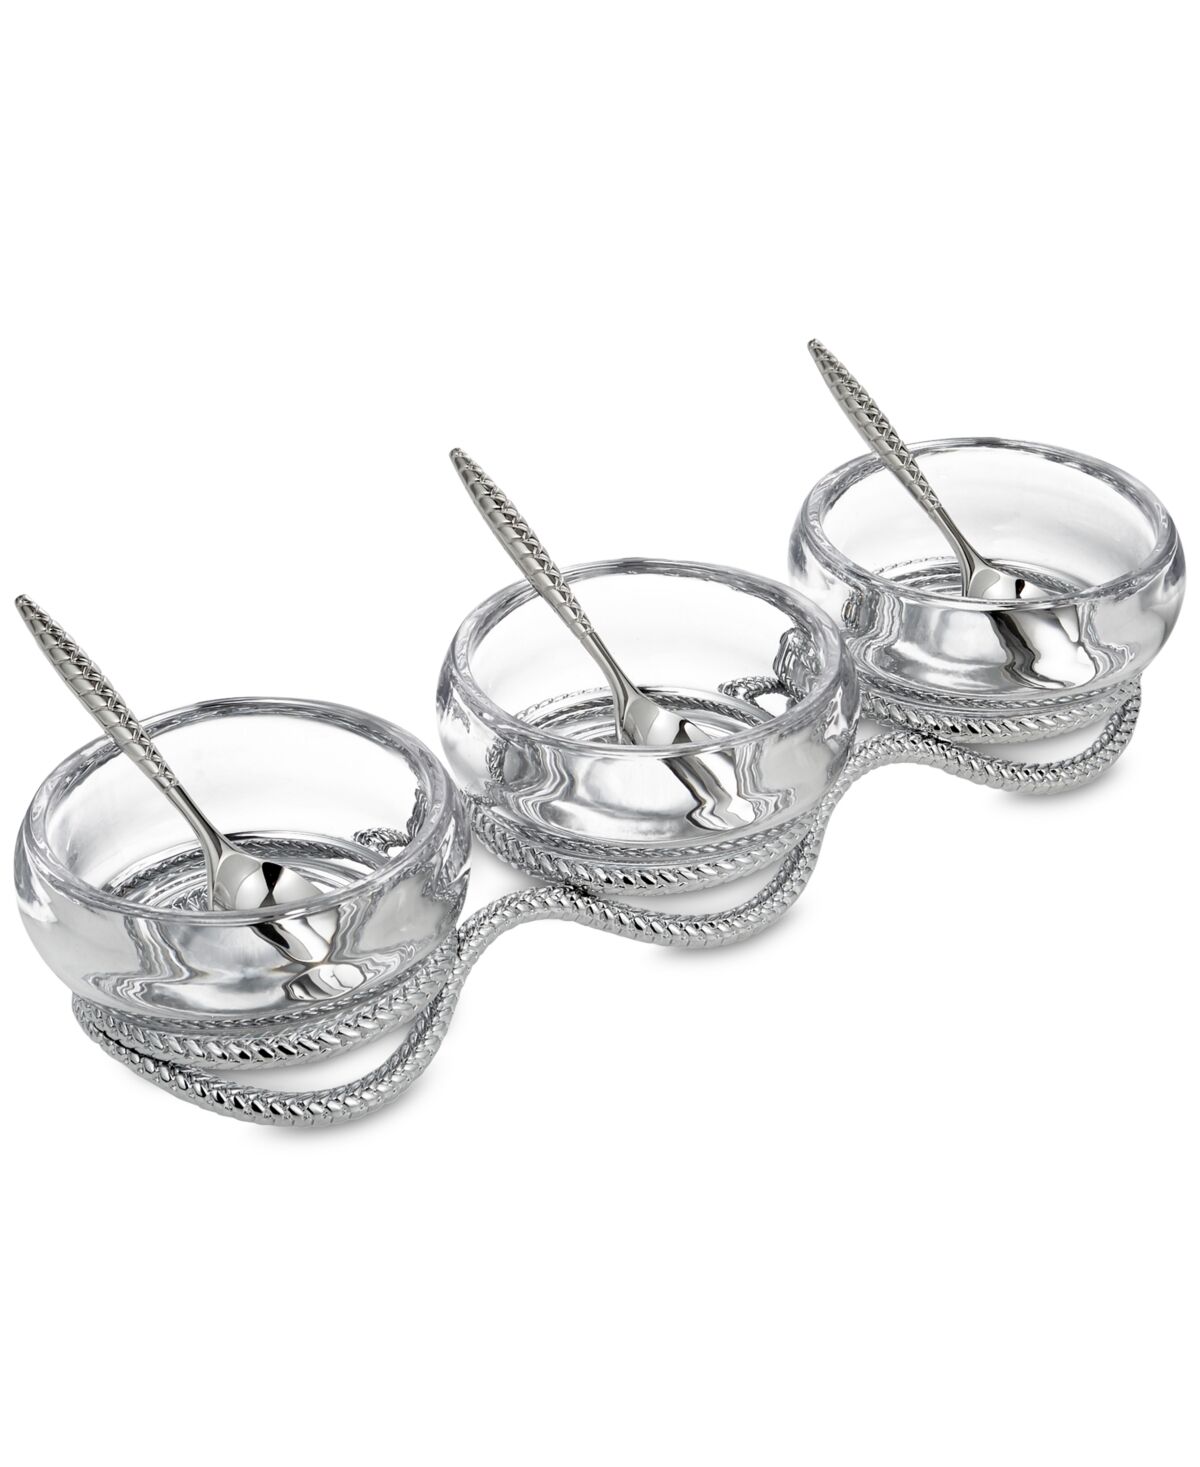 Nambe Braid Triple Condiment Set with Spoons - Clear And Silver